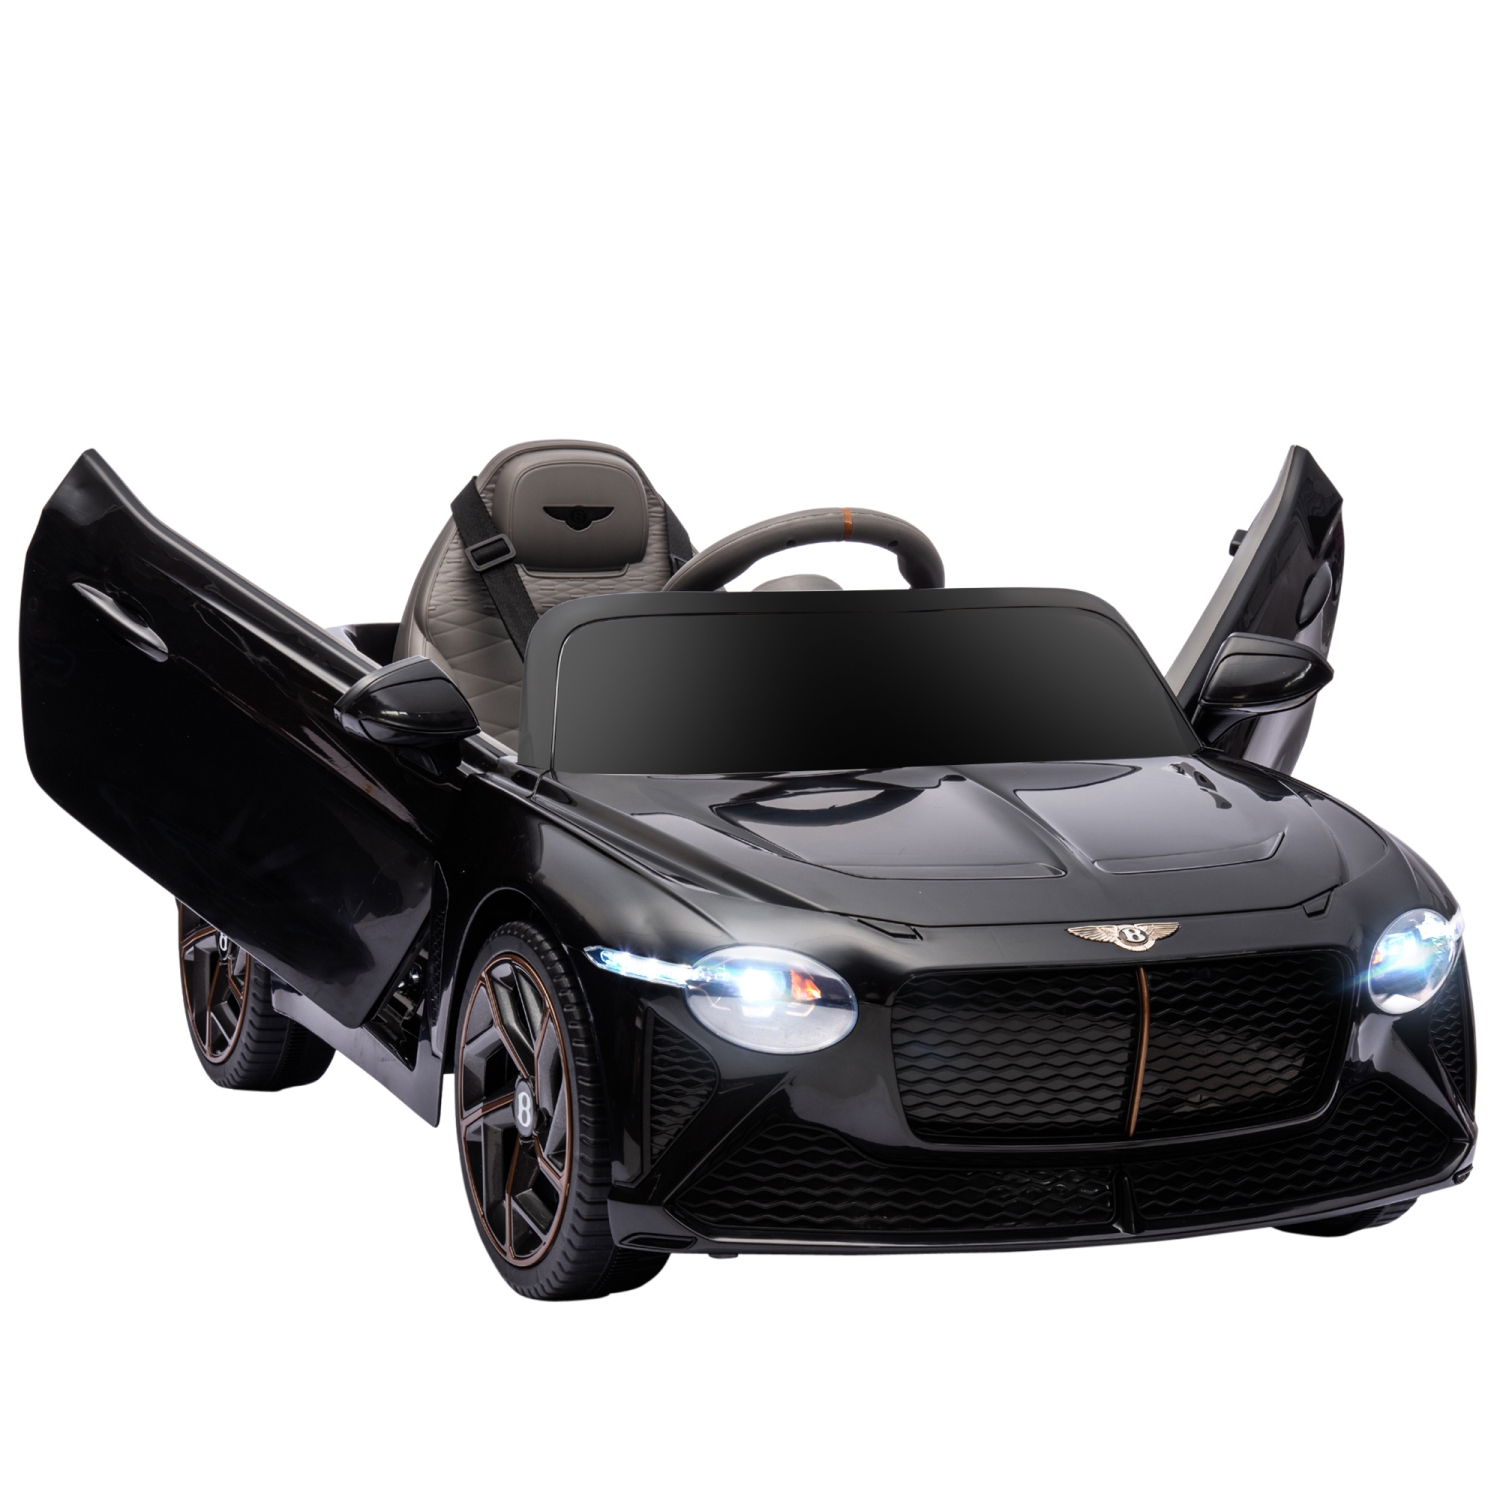 Aosom 12V Electric Ride on Car with Butterfly Doors, 3.1 MPH Kids Ride-on Toy for Boys and Girls with Remote Control, Suspension System, Horn Honking, Black